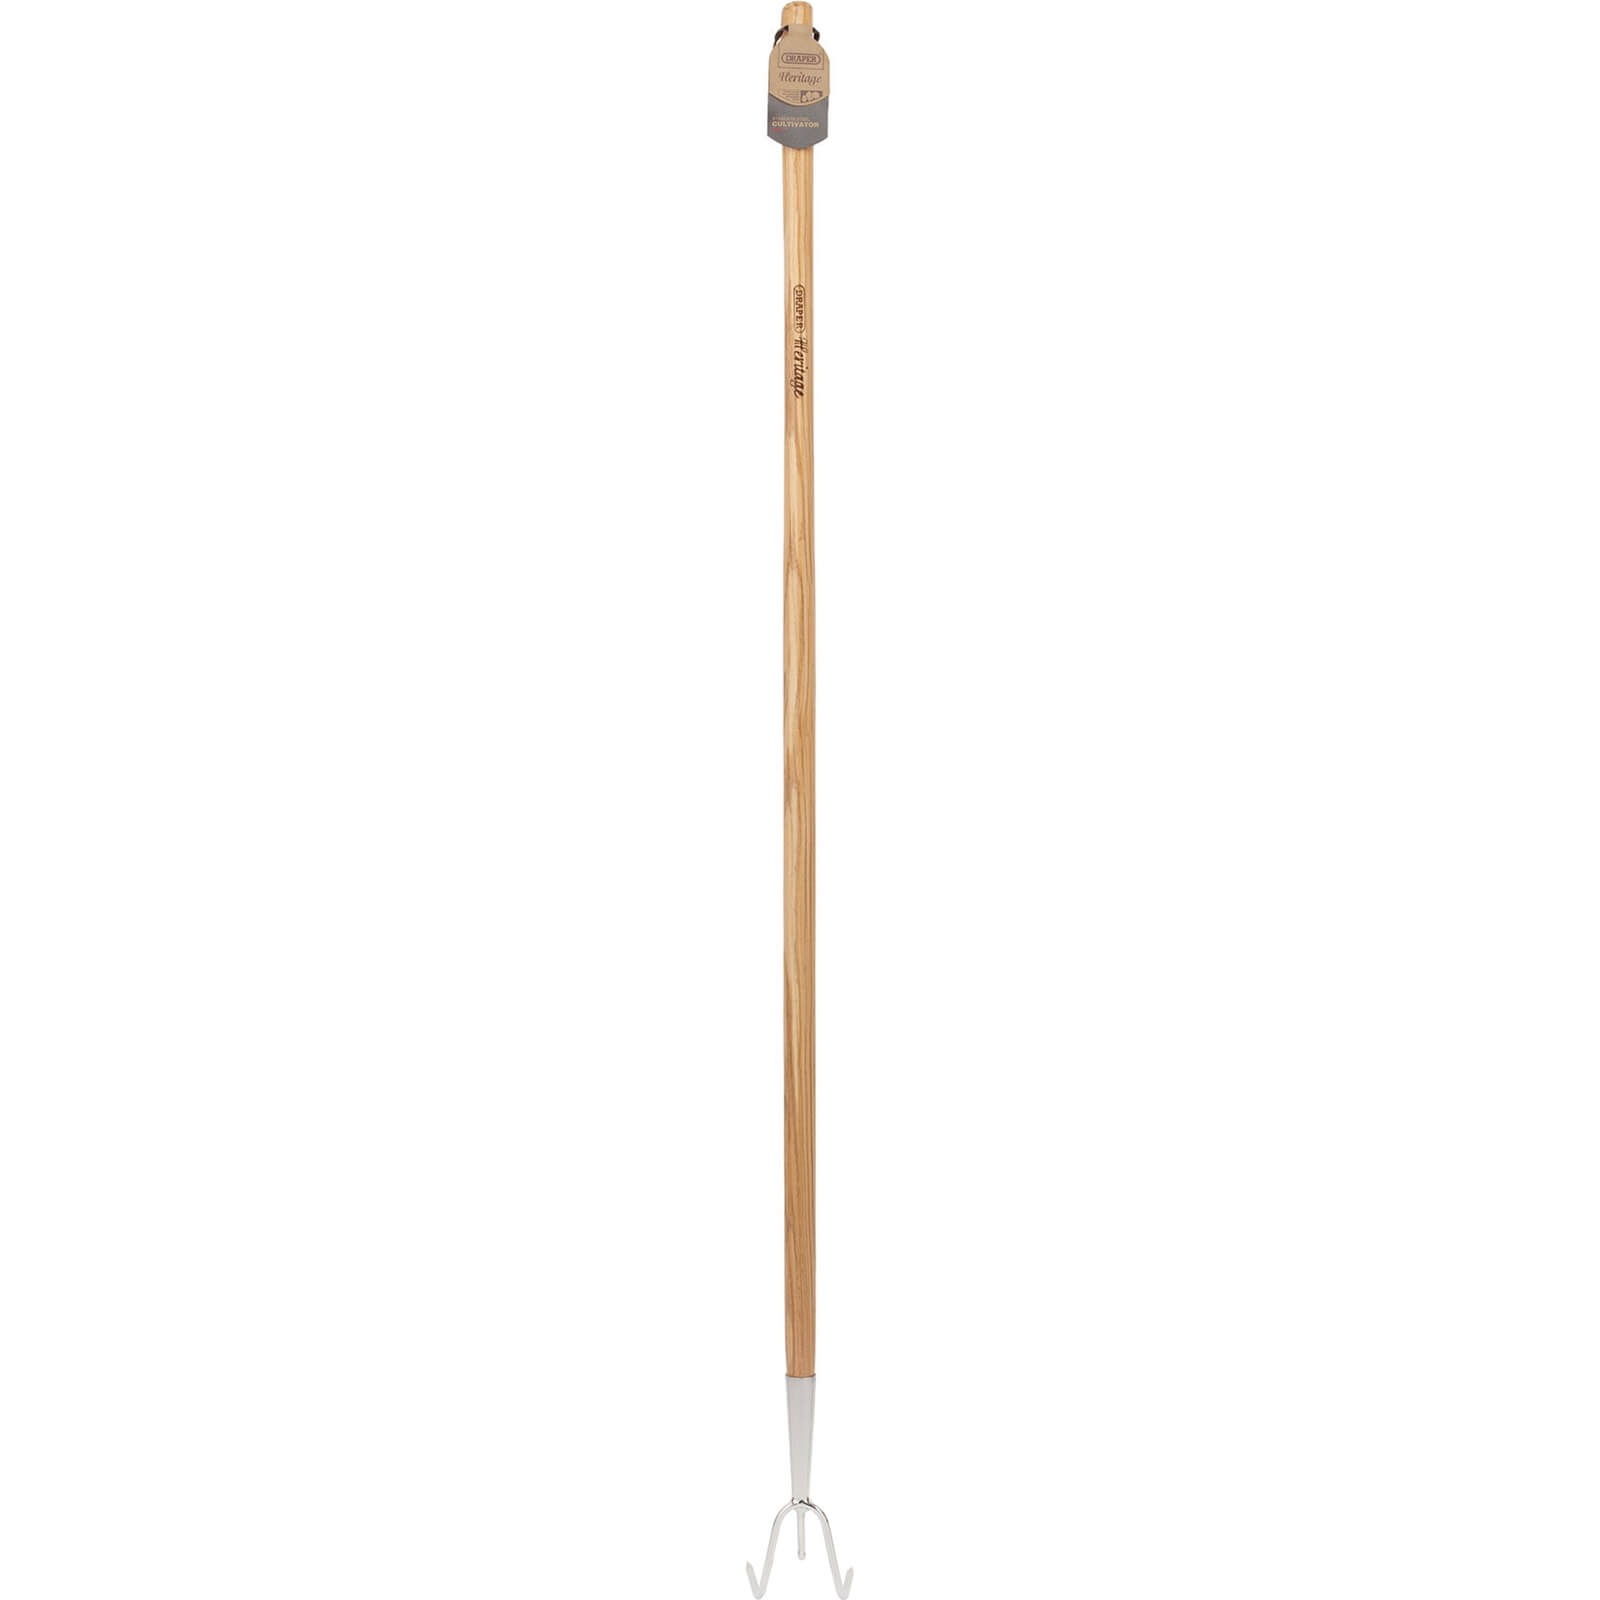 Image of Draper Heritage Ash Handle 3 Prong Cultivator